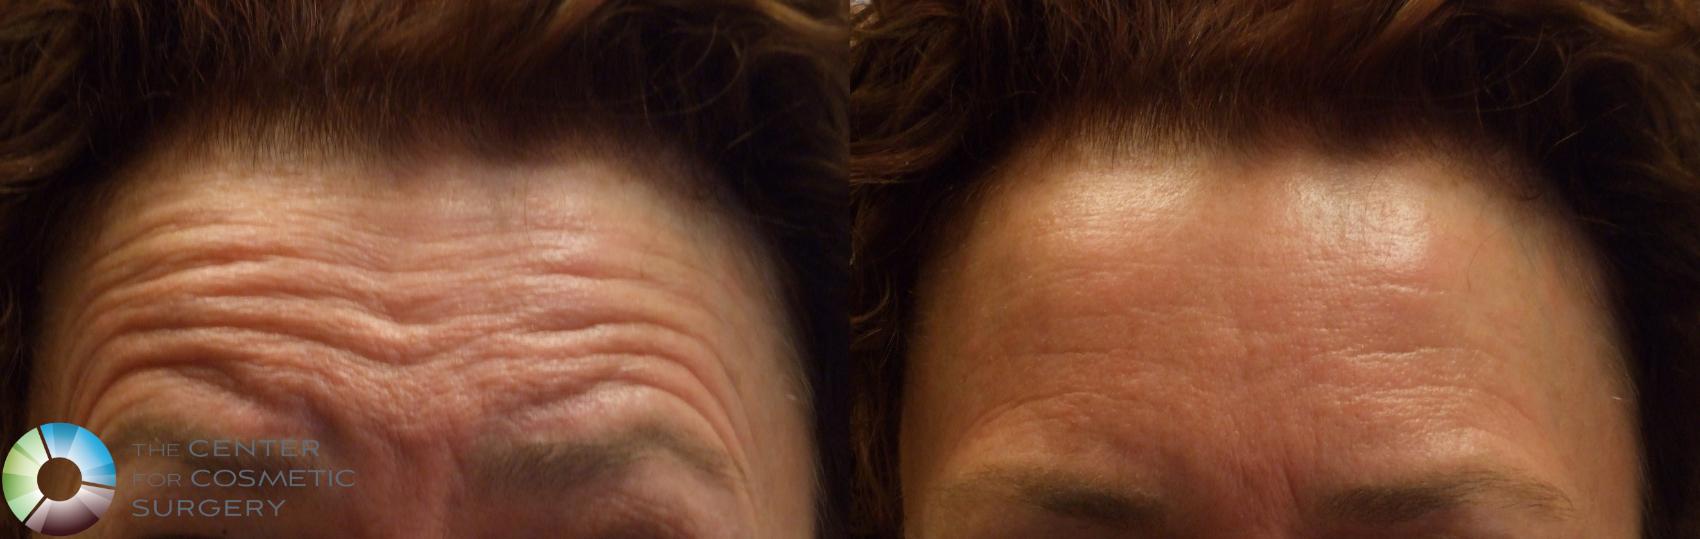 Before & After BOTOX® Cosmetic Case 279 View #1 in Denver and Colorado Springs, CO